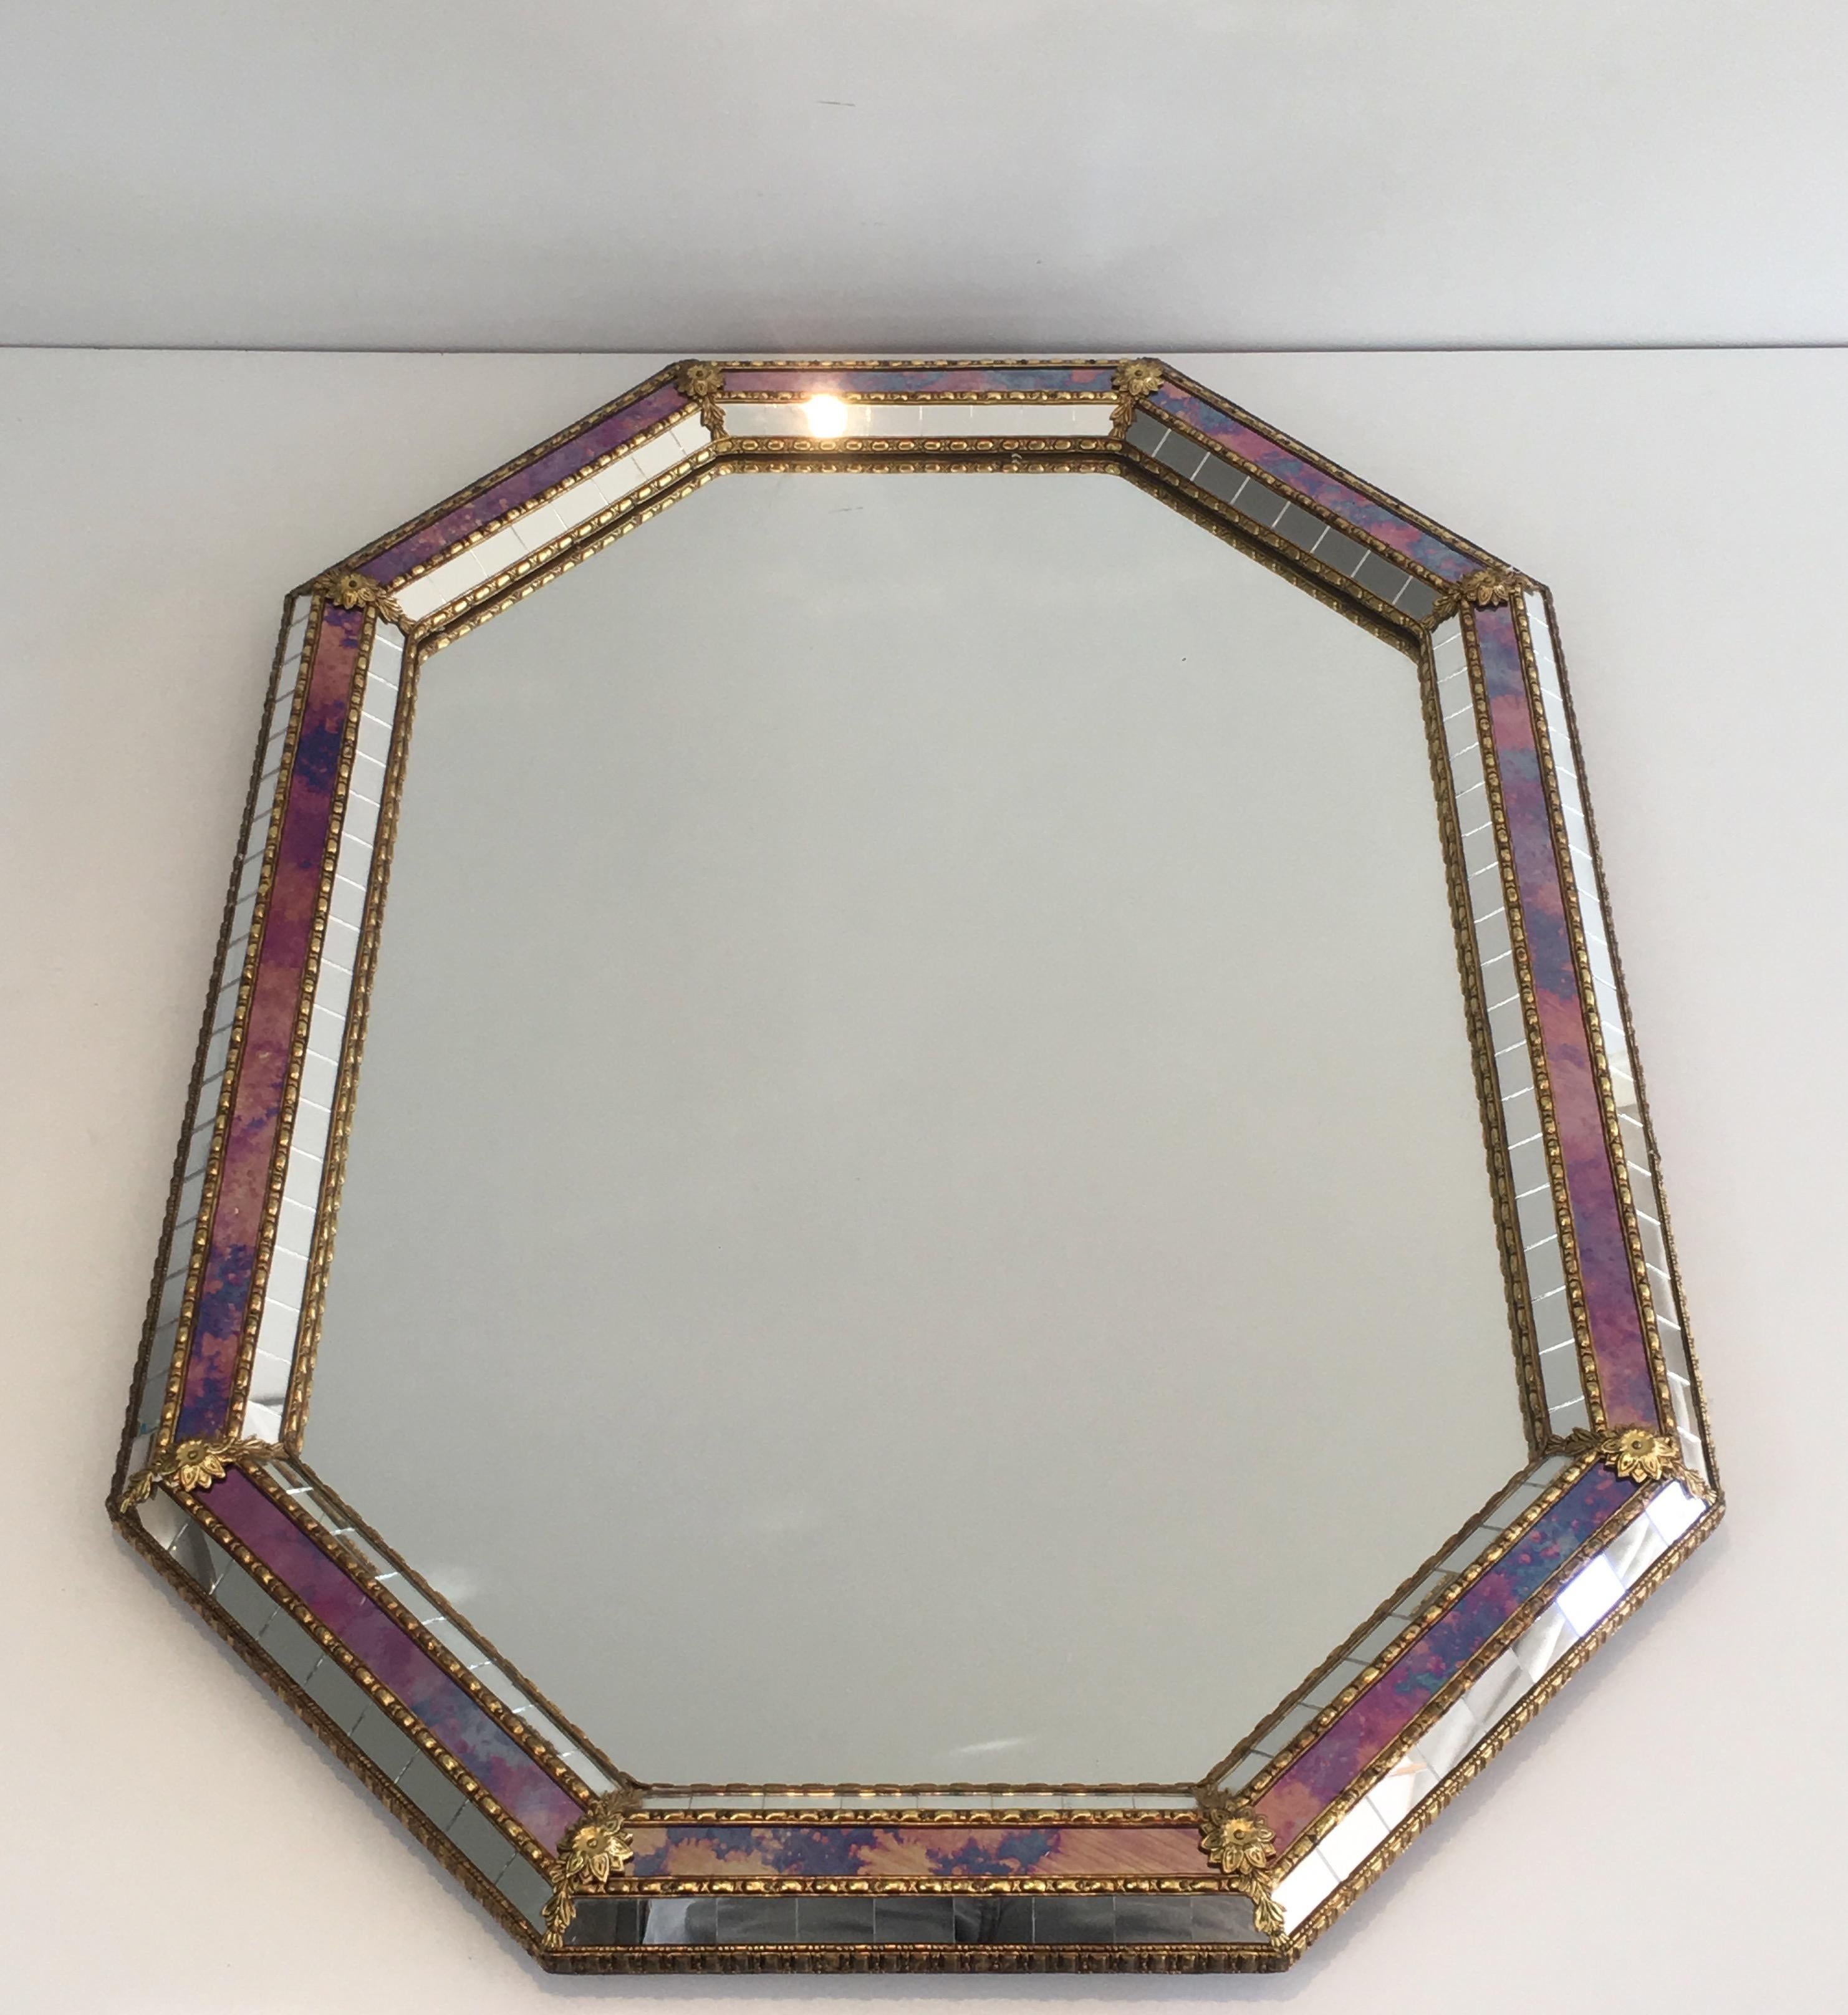 This octogonal mirror is made of brass garlands, flowers and mirror faceted. This is a French work, circa 1970.